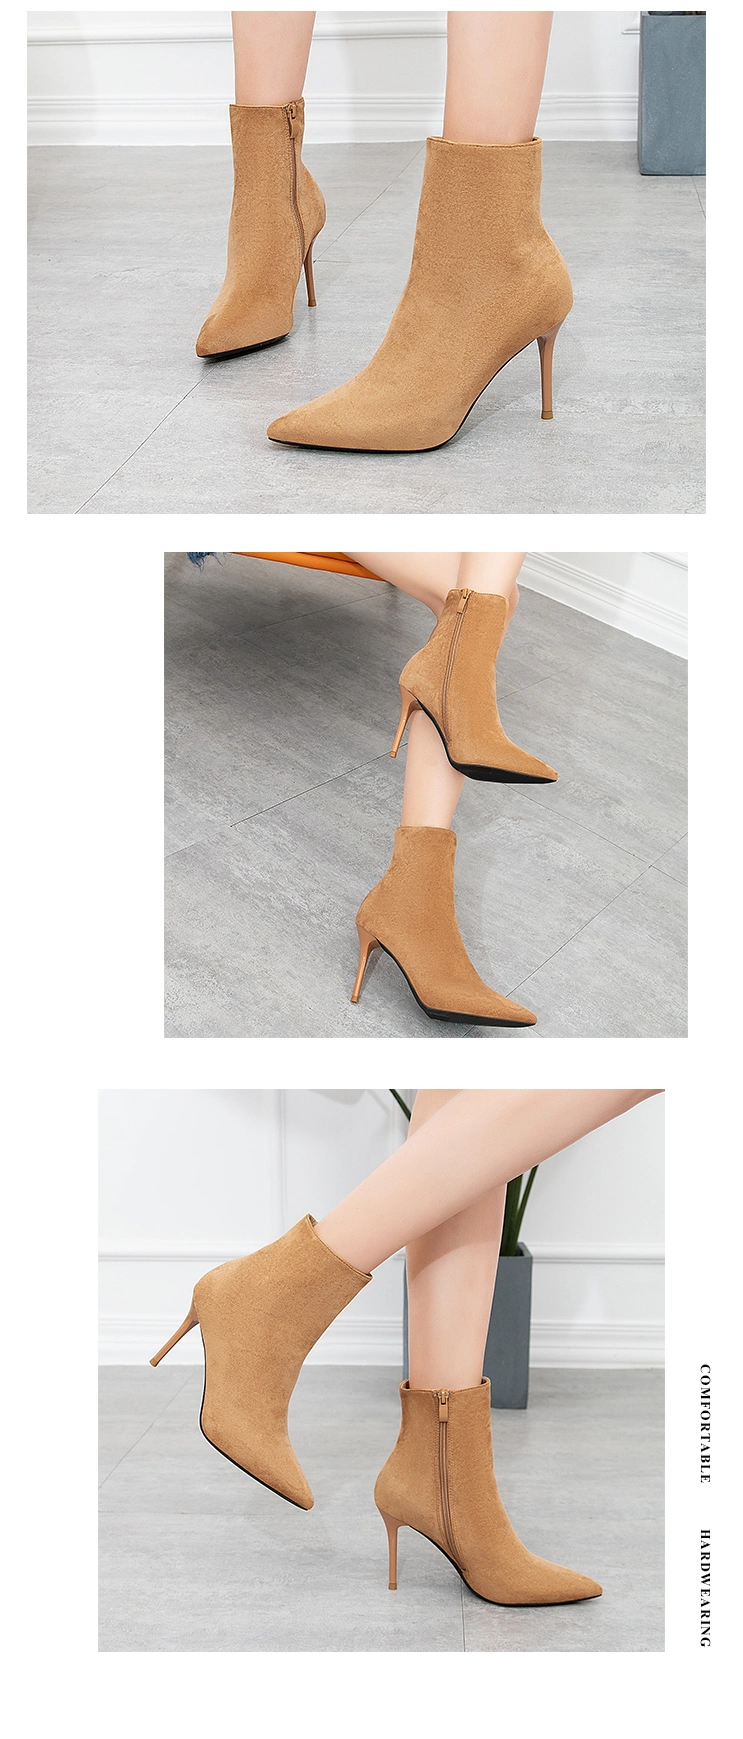 2021 Newest Style Stiletto Heels Sexy Unique Pointed Women High Heel Boots Pumps Bride Shoes